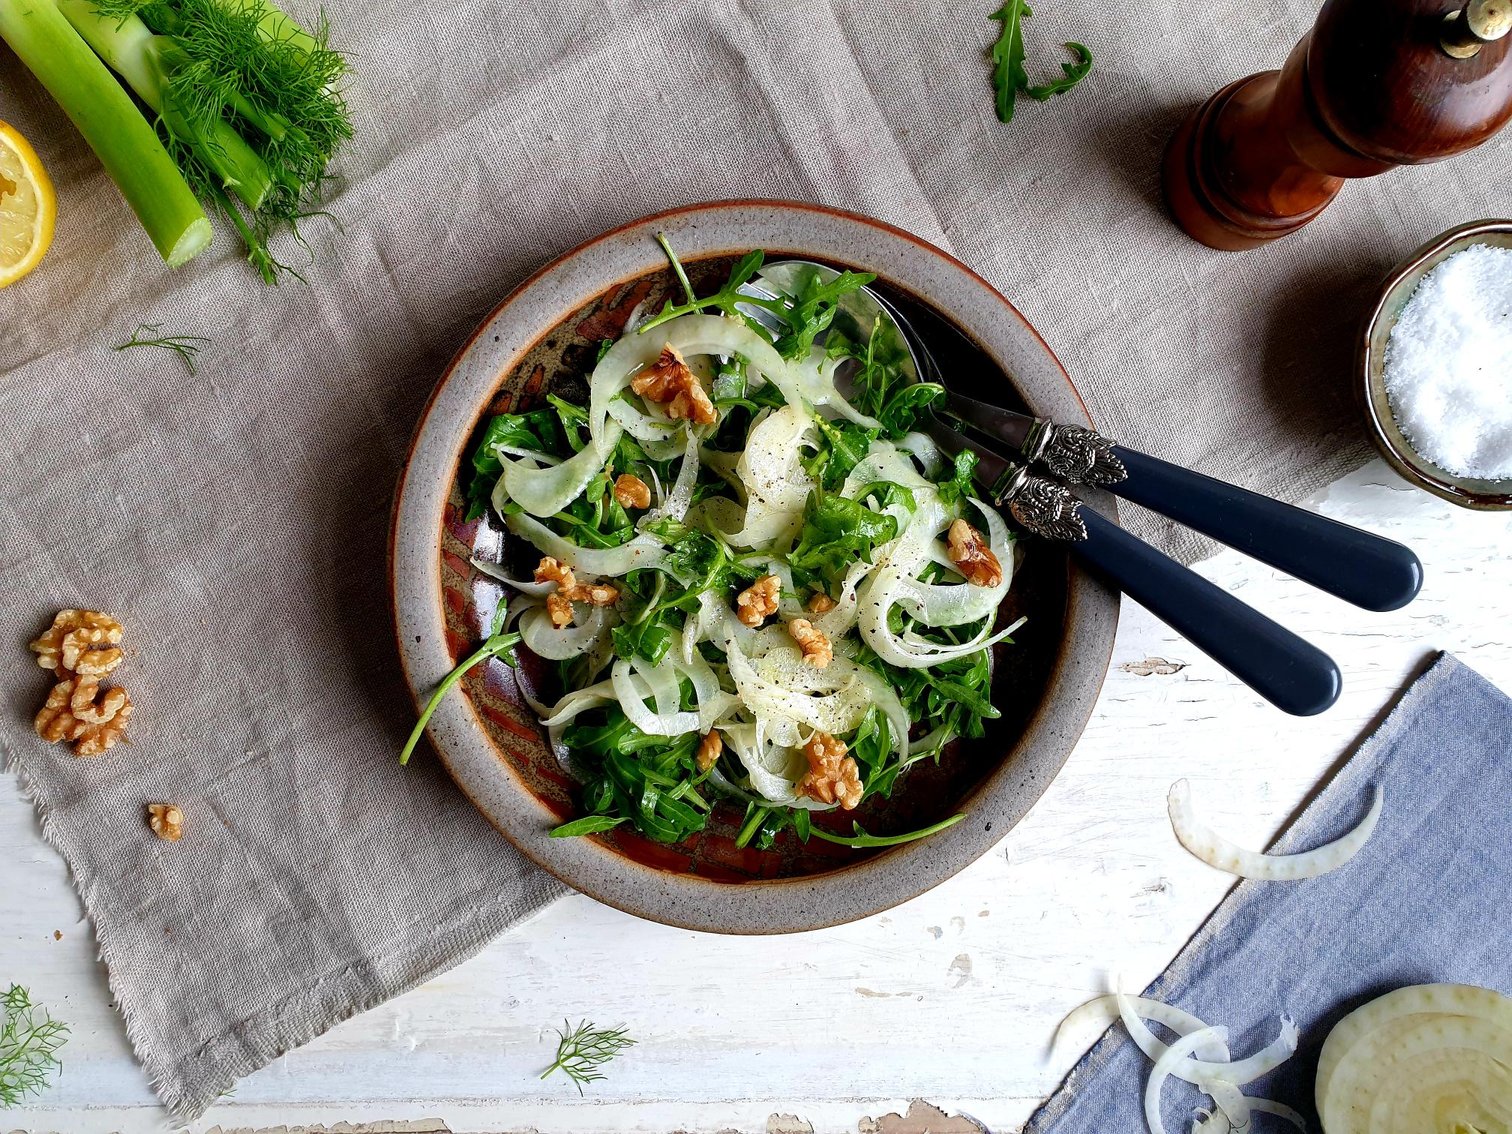 Sliced Fennel and Rocket Salad with Olive Oil and Lemon Dressing Istrian Recipe